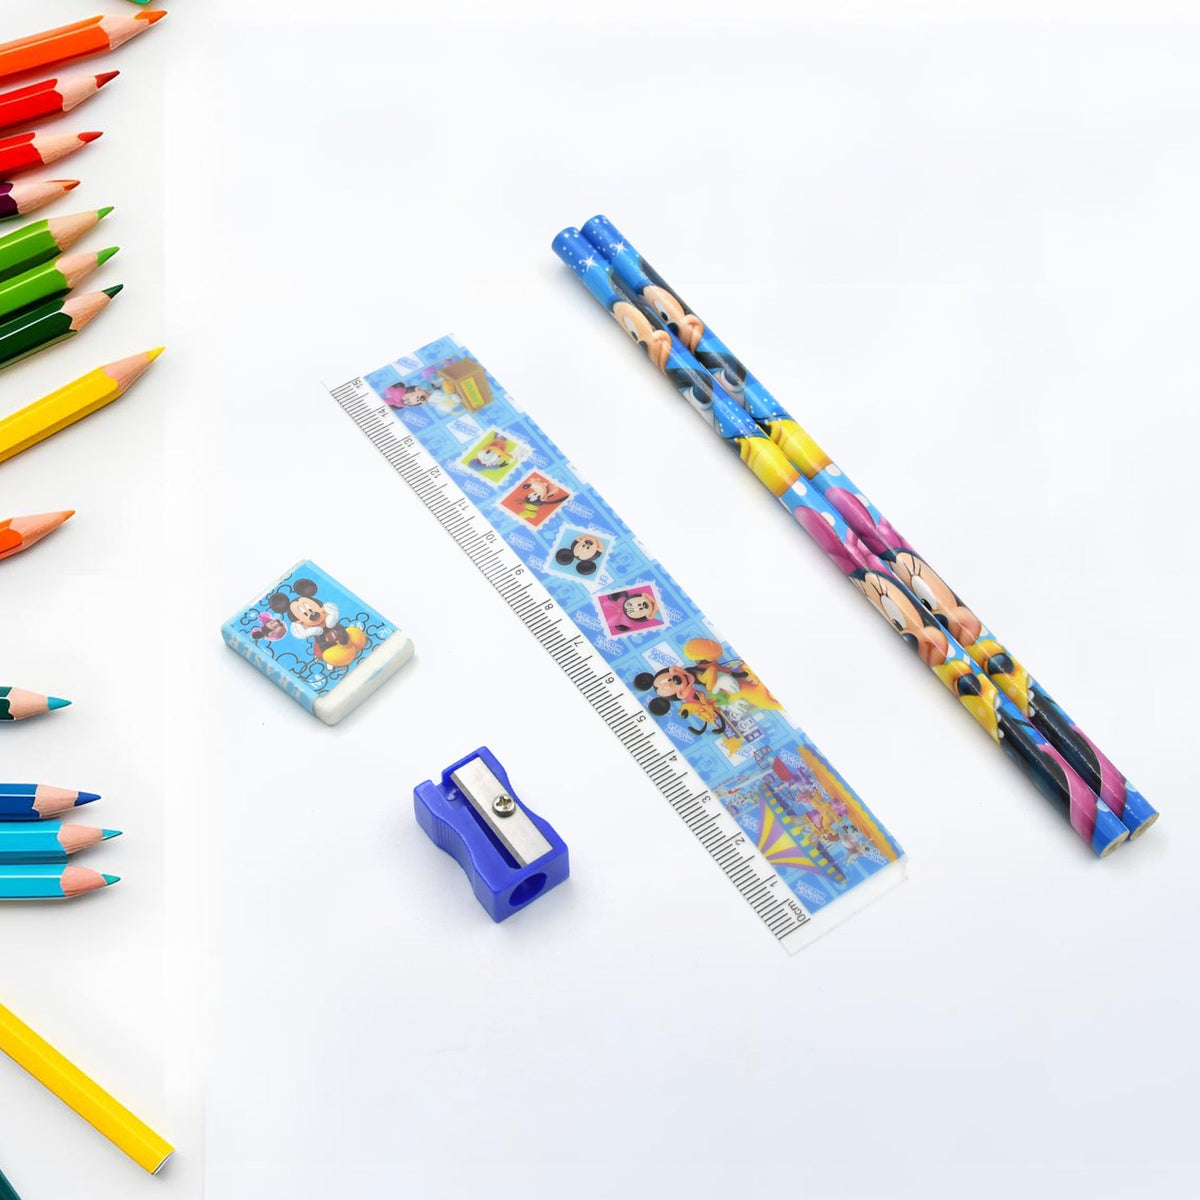 4643  Mix Design Cartoon Wooden Pencil Set, Stationary Set 5 in 1 Items Educational Item for School Going Kids, Stationary Set for Girls Boys/Stationary for School/Gift Pack for Girls Kids/Birthday Gift Kids (5 Pc Set )